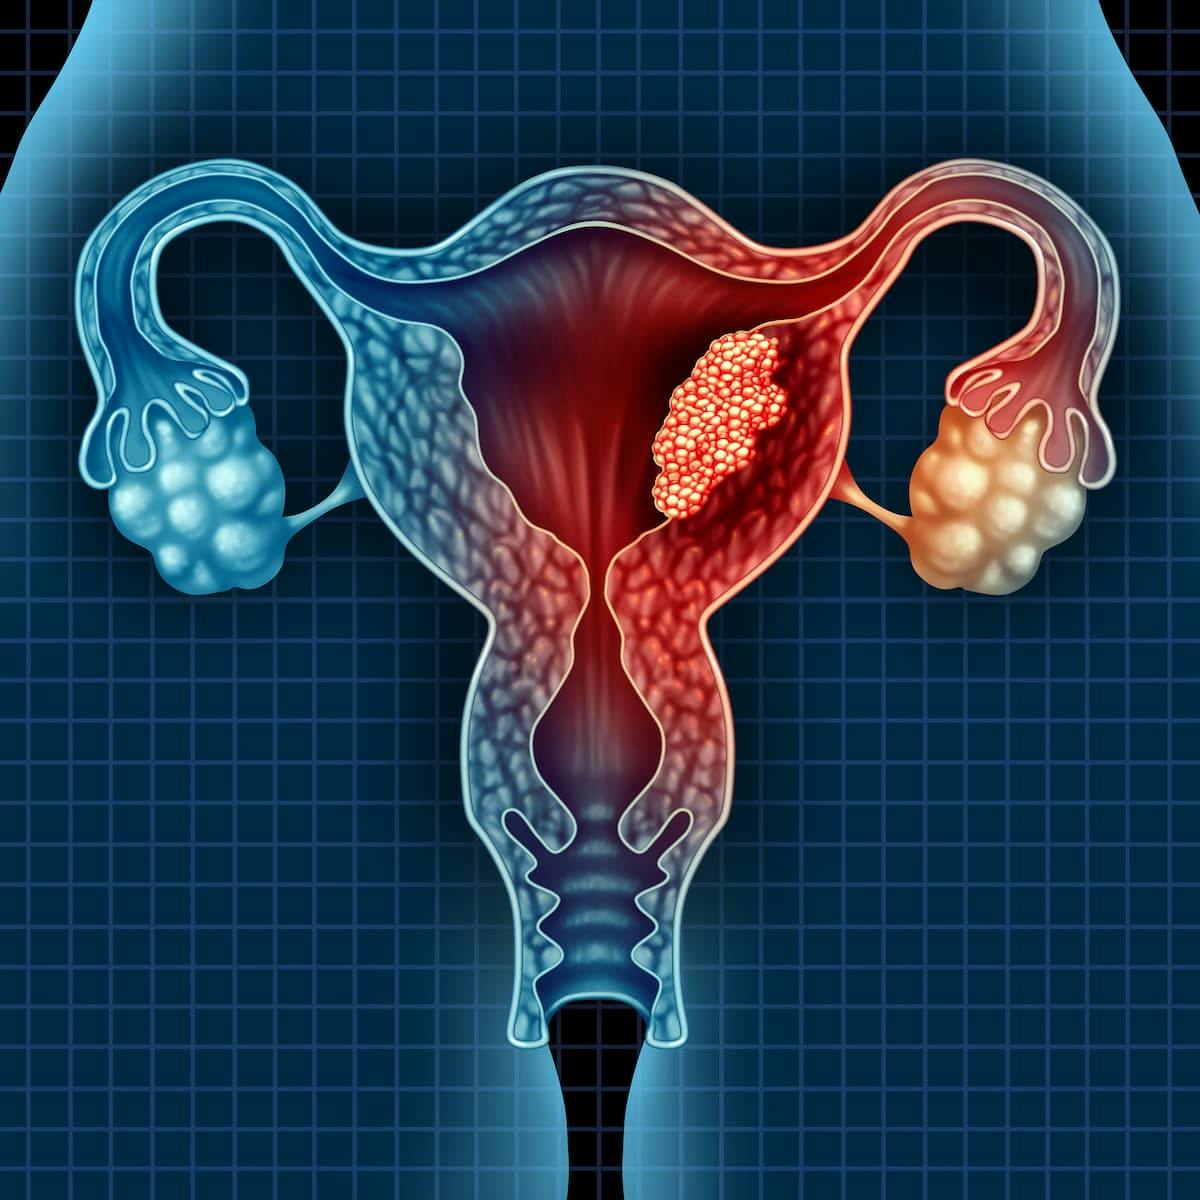 "Omitting radiotherapy is safe in [patients] with POLE-mutated [endometrial cancer] and will reduce toxicity, improve quality of life, and reduce health care utilization and costs," according to the study authors.